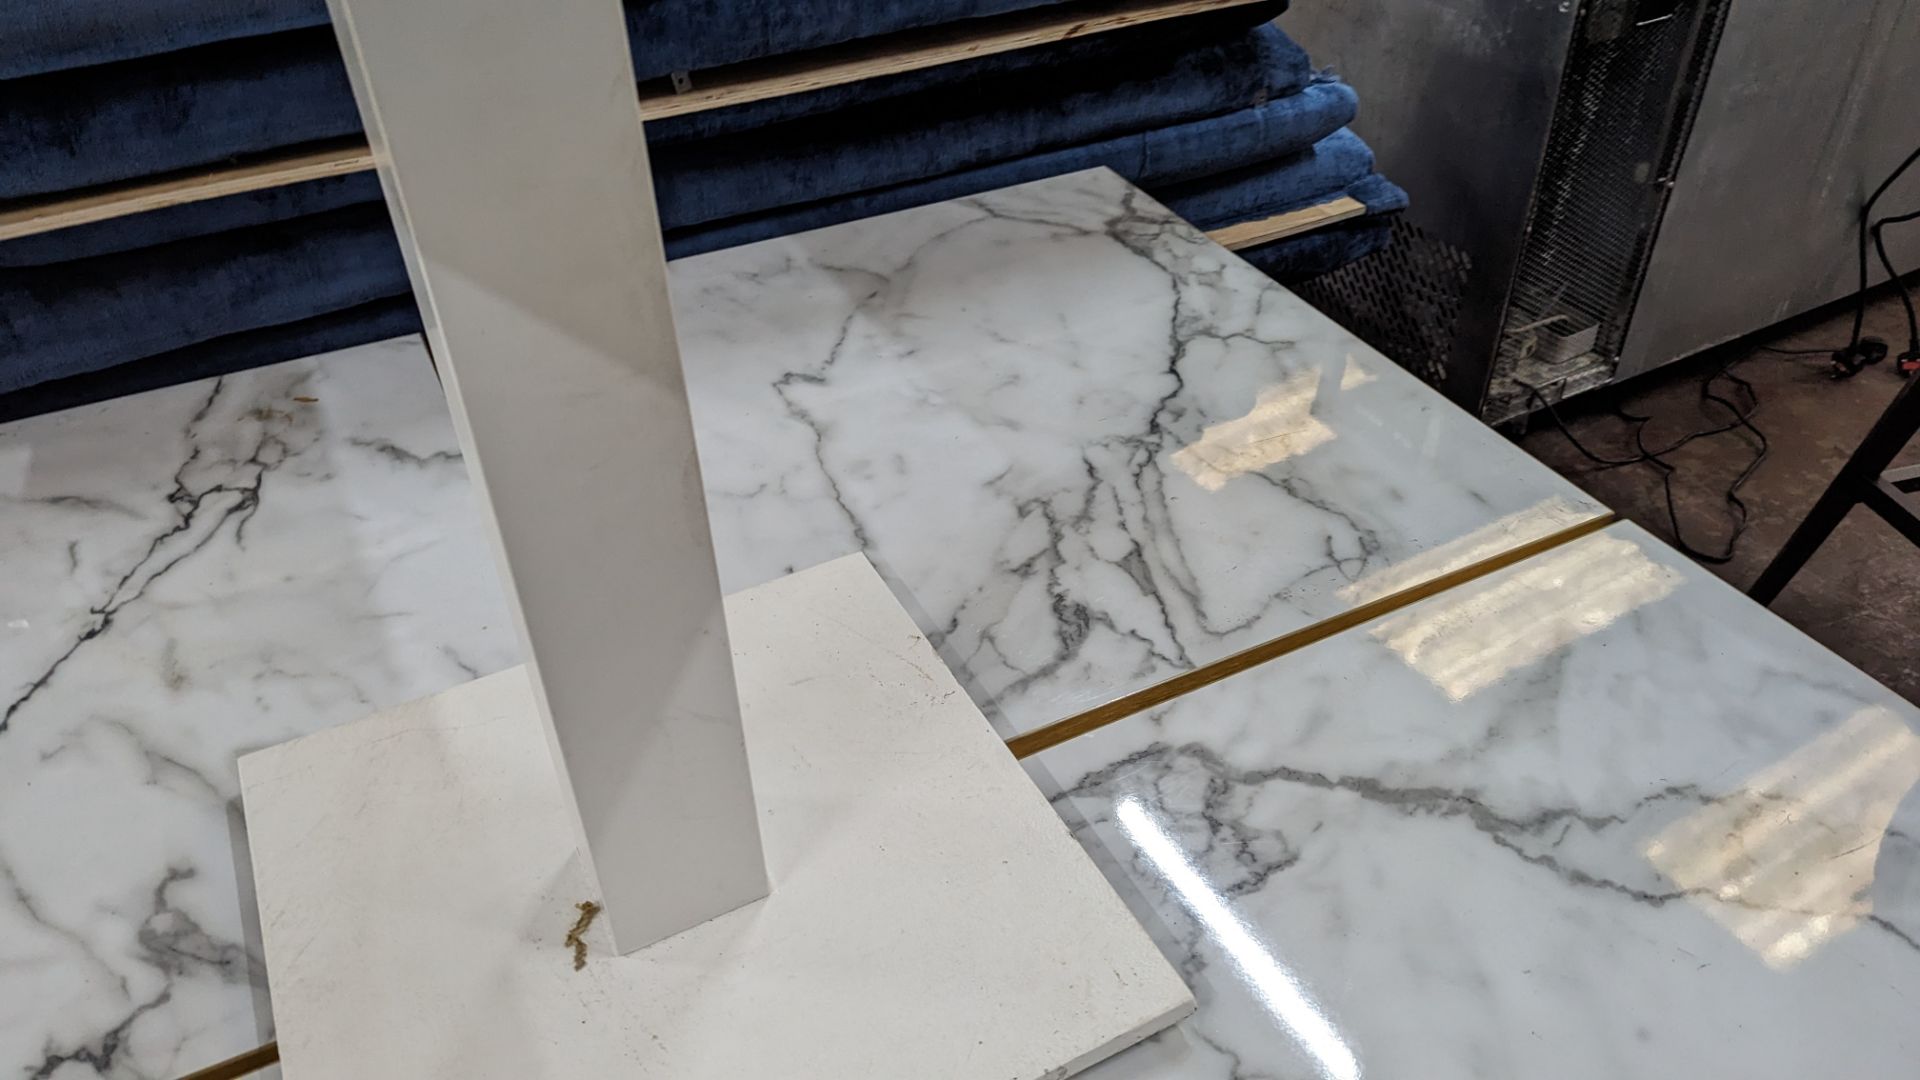 10 off matching dining tables in 3 different sizes with marble effect tops. 2 of the tables are ret - Image 12 of 19